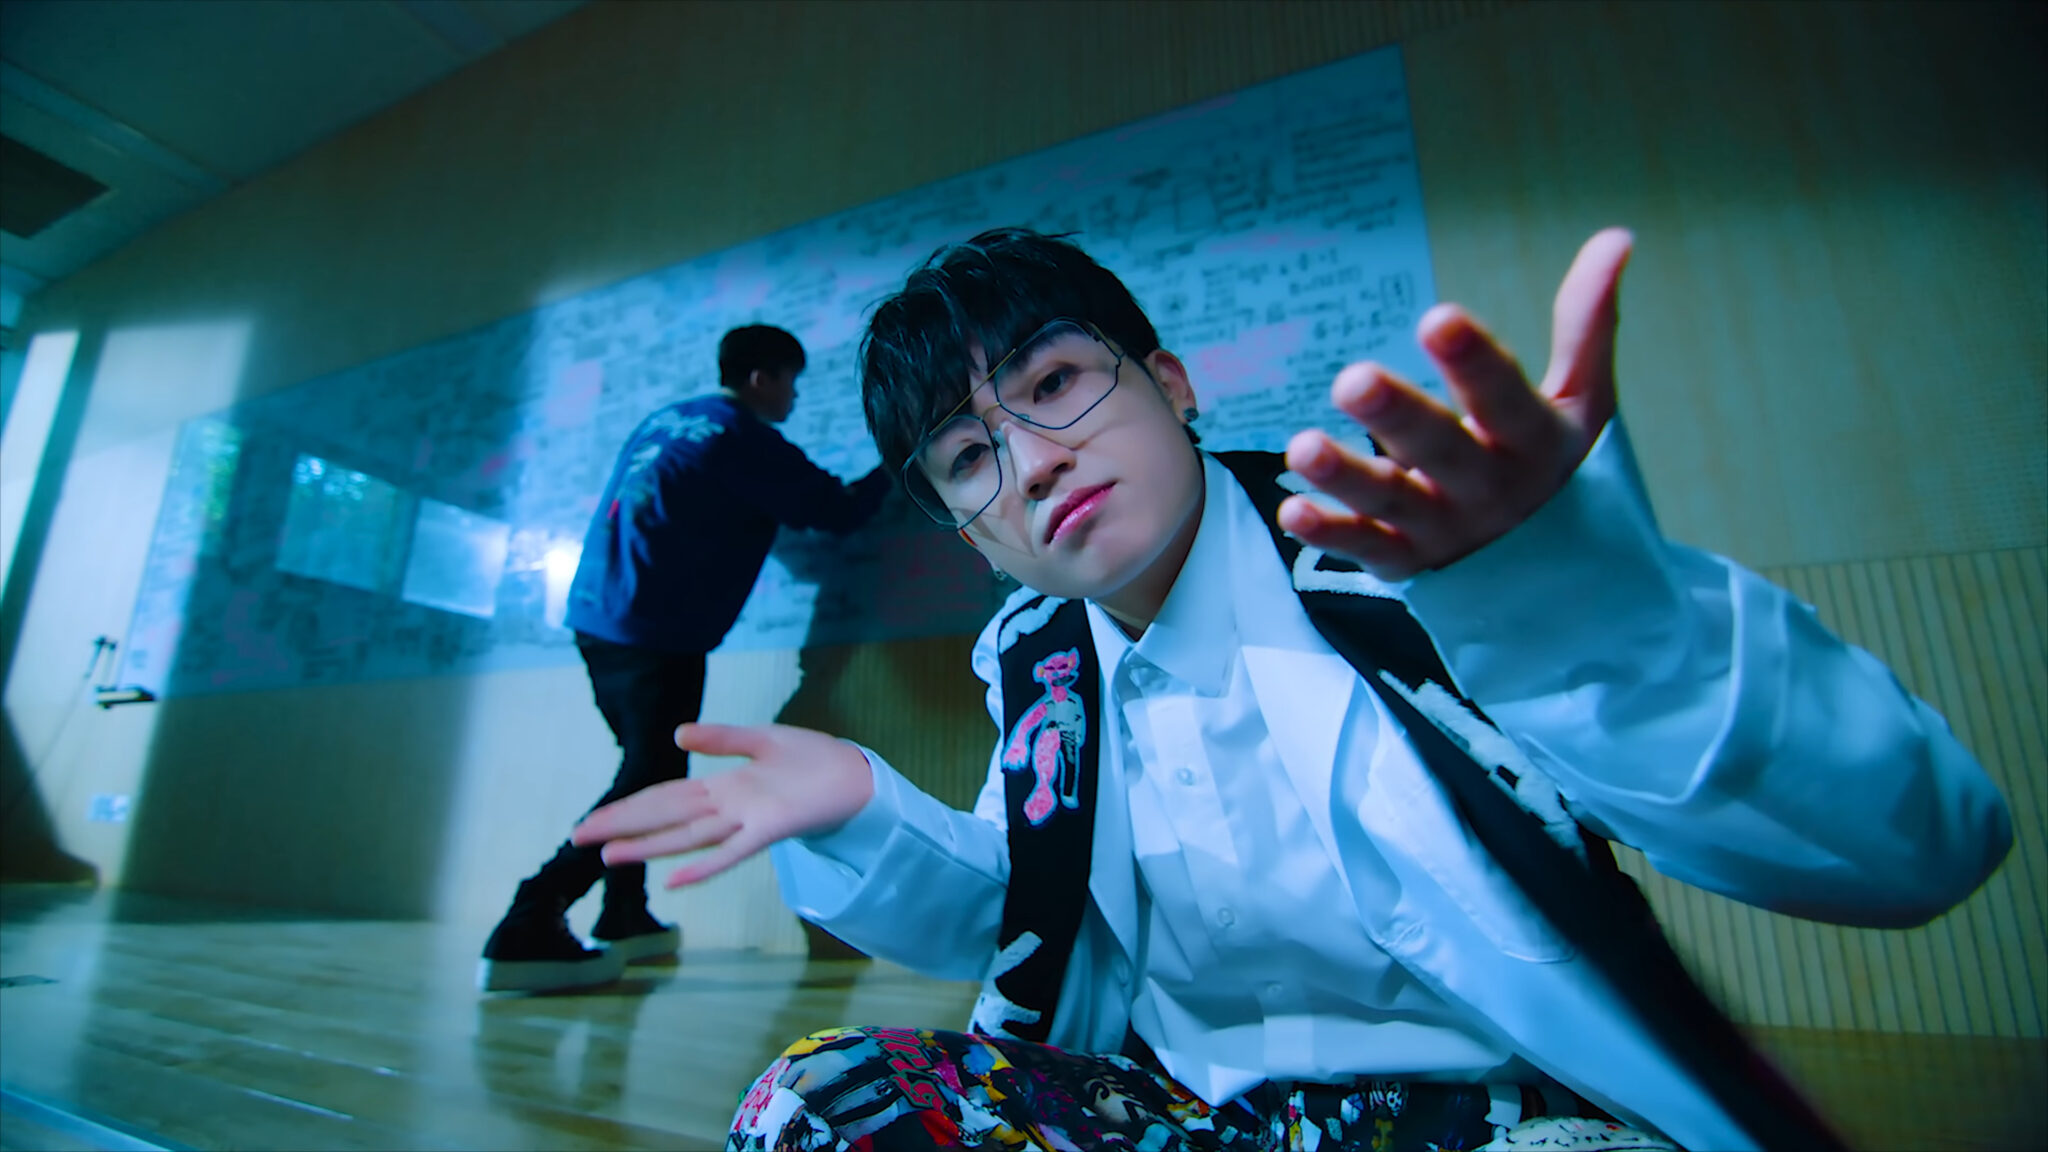 D.Ark Flexes his Talents and Youth in “Genius” – Seoulbeats